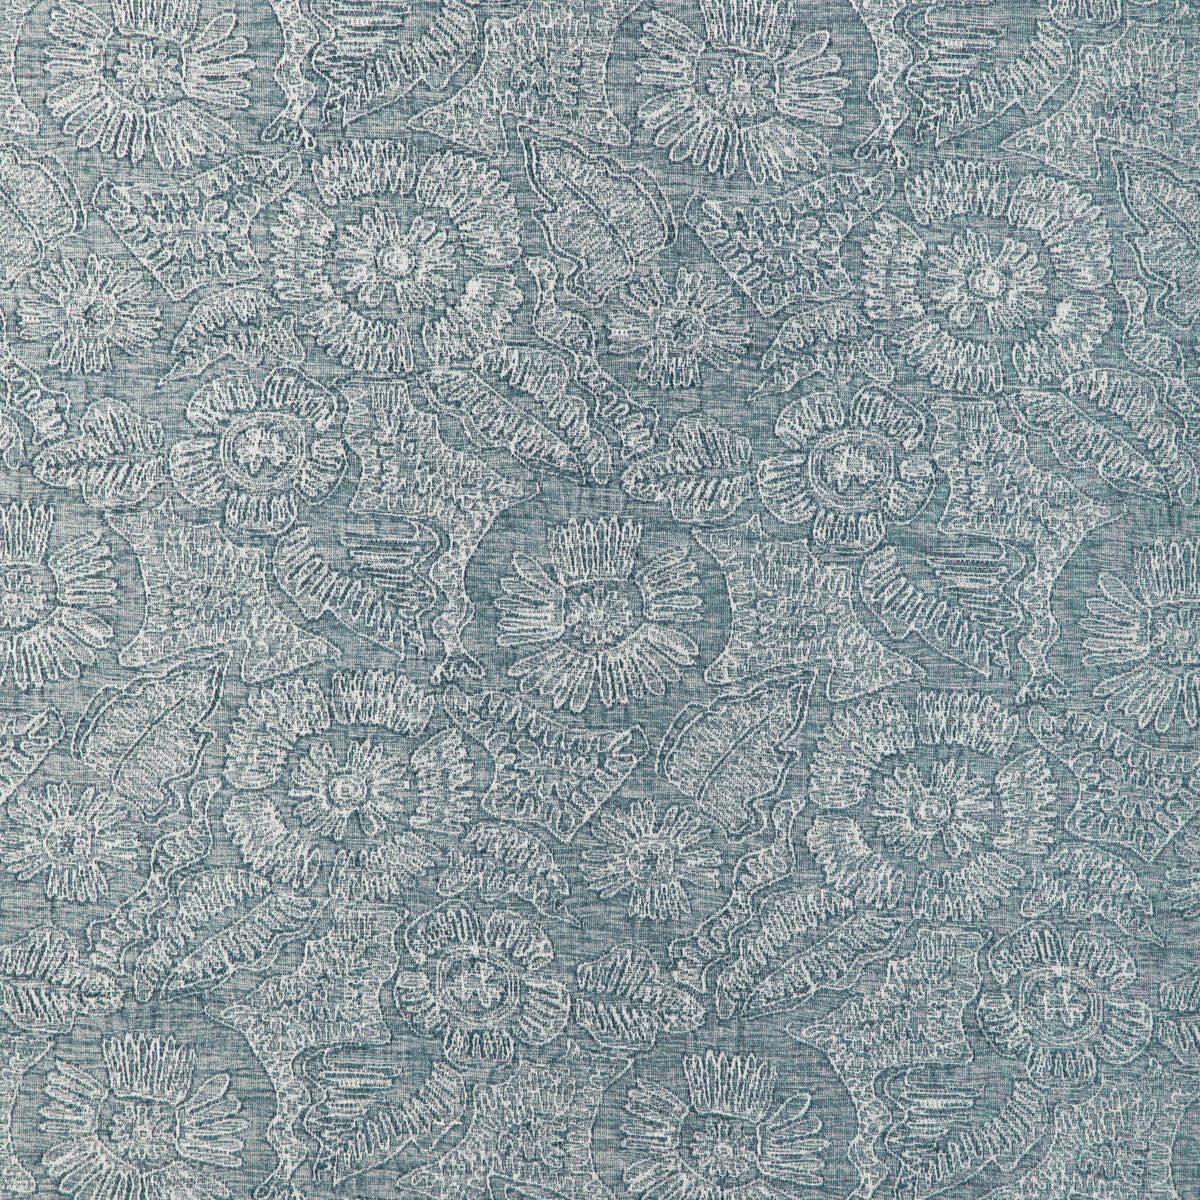 Chenille Bloom fabric in sky color - pattern 36889.5.0 - by Kravet Couture in the Atelier Weaves collection